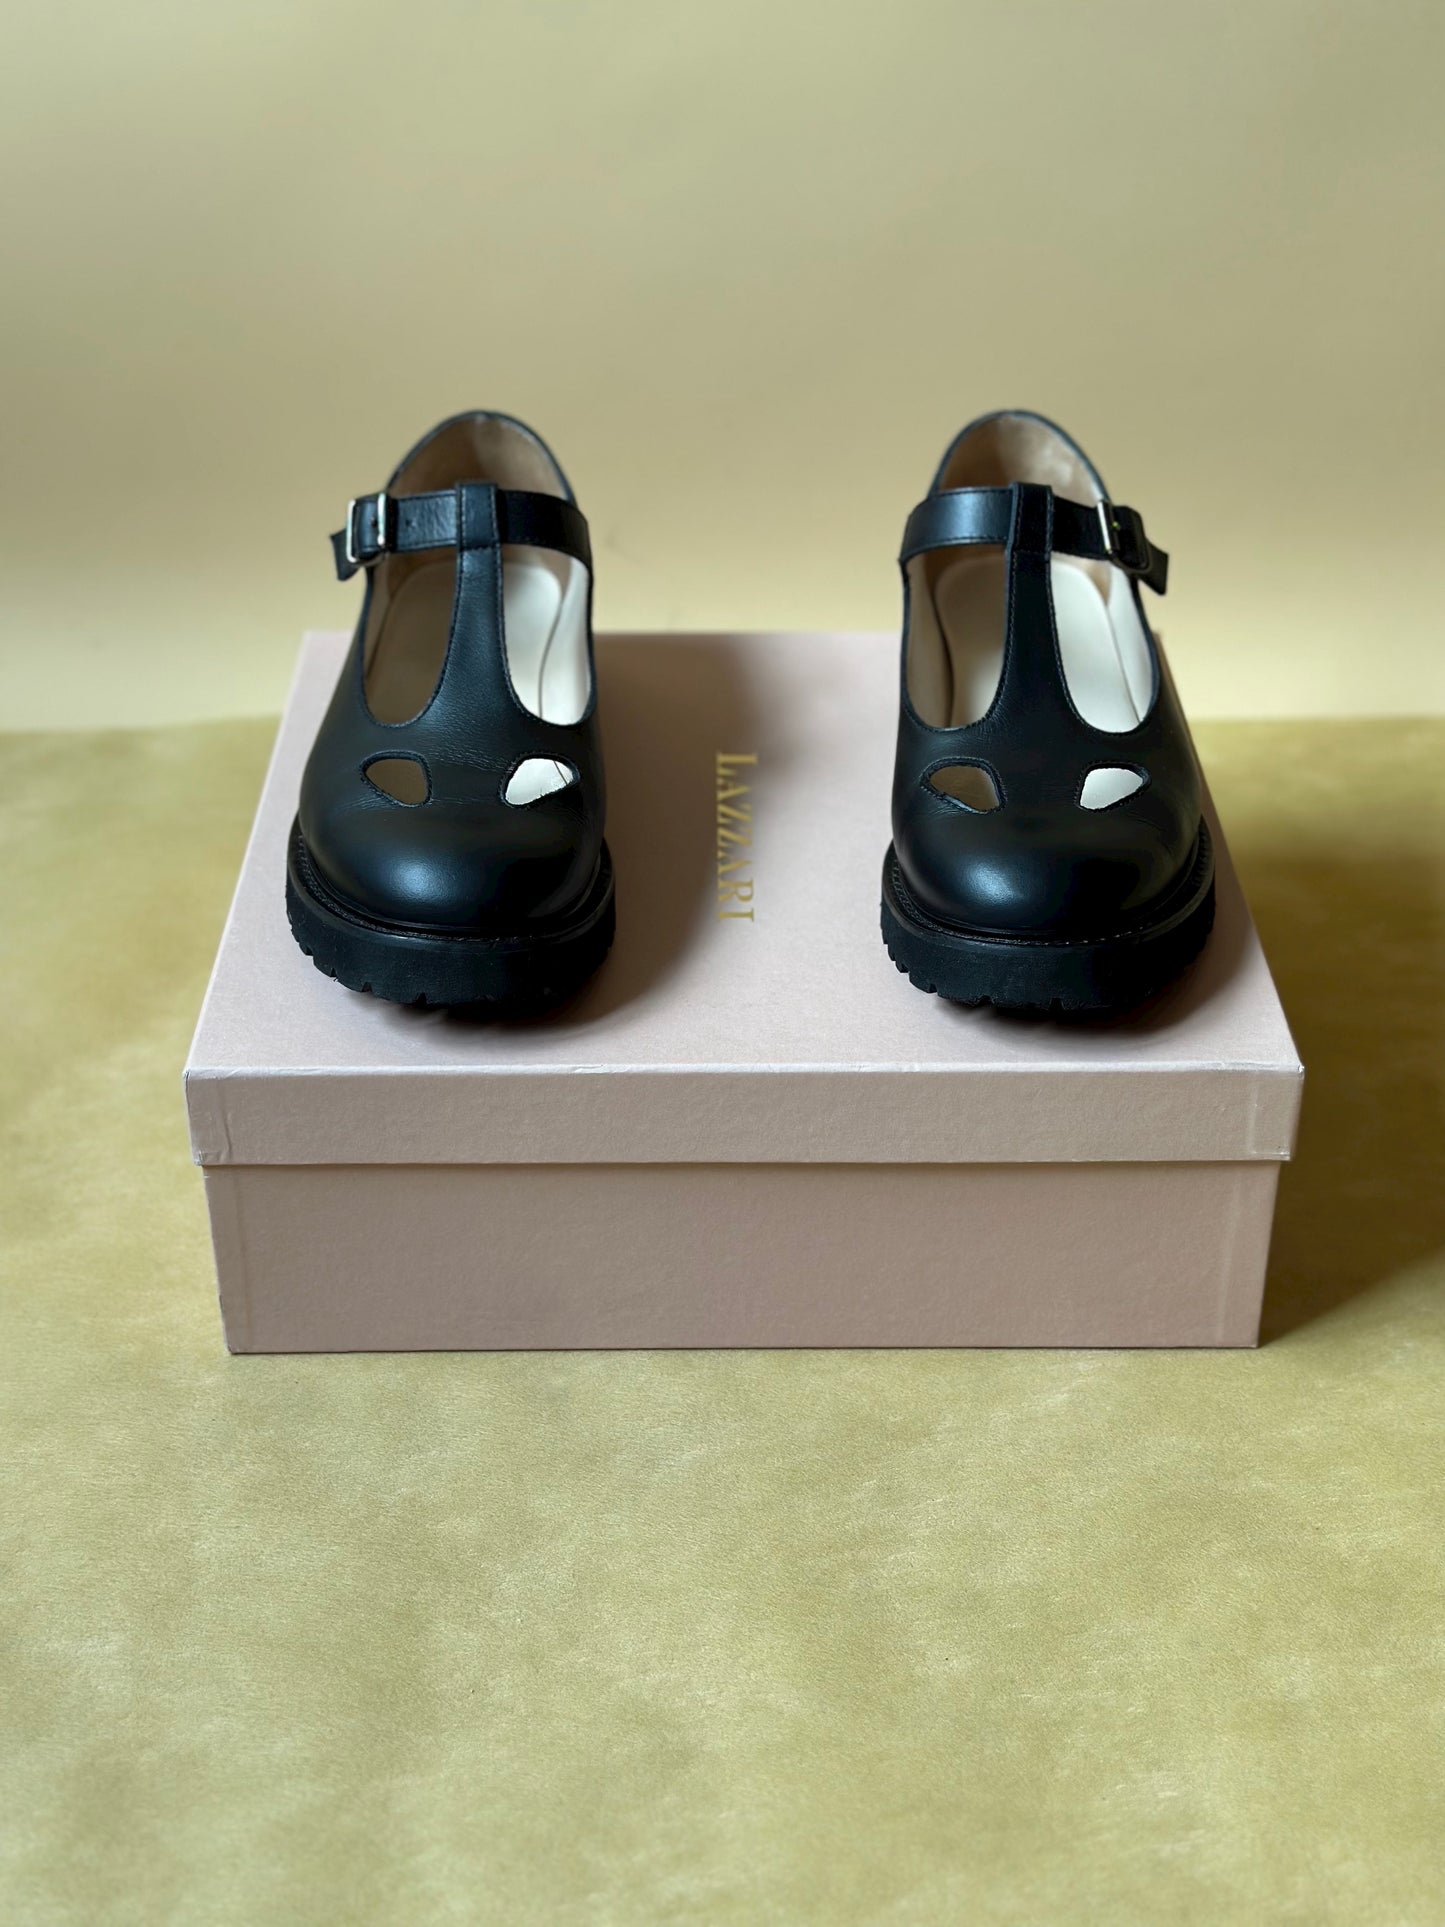 Real Leather Black Mary Janes Lazzari